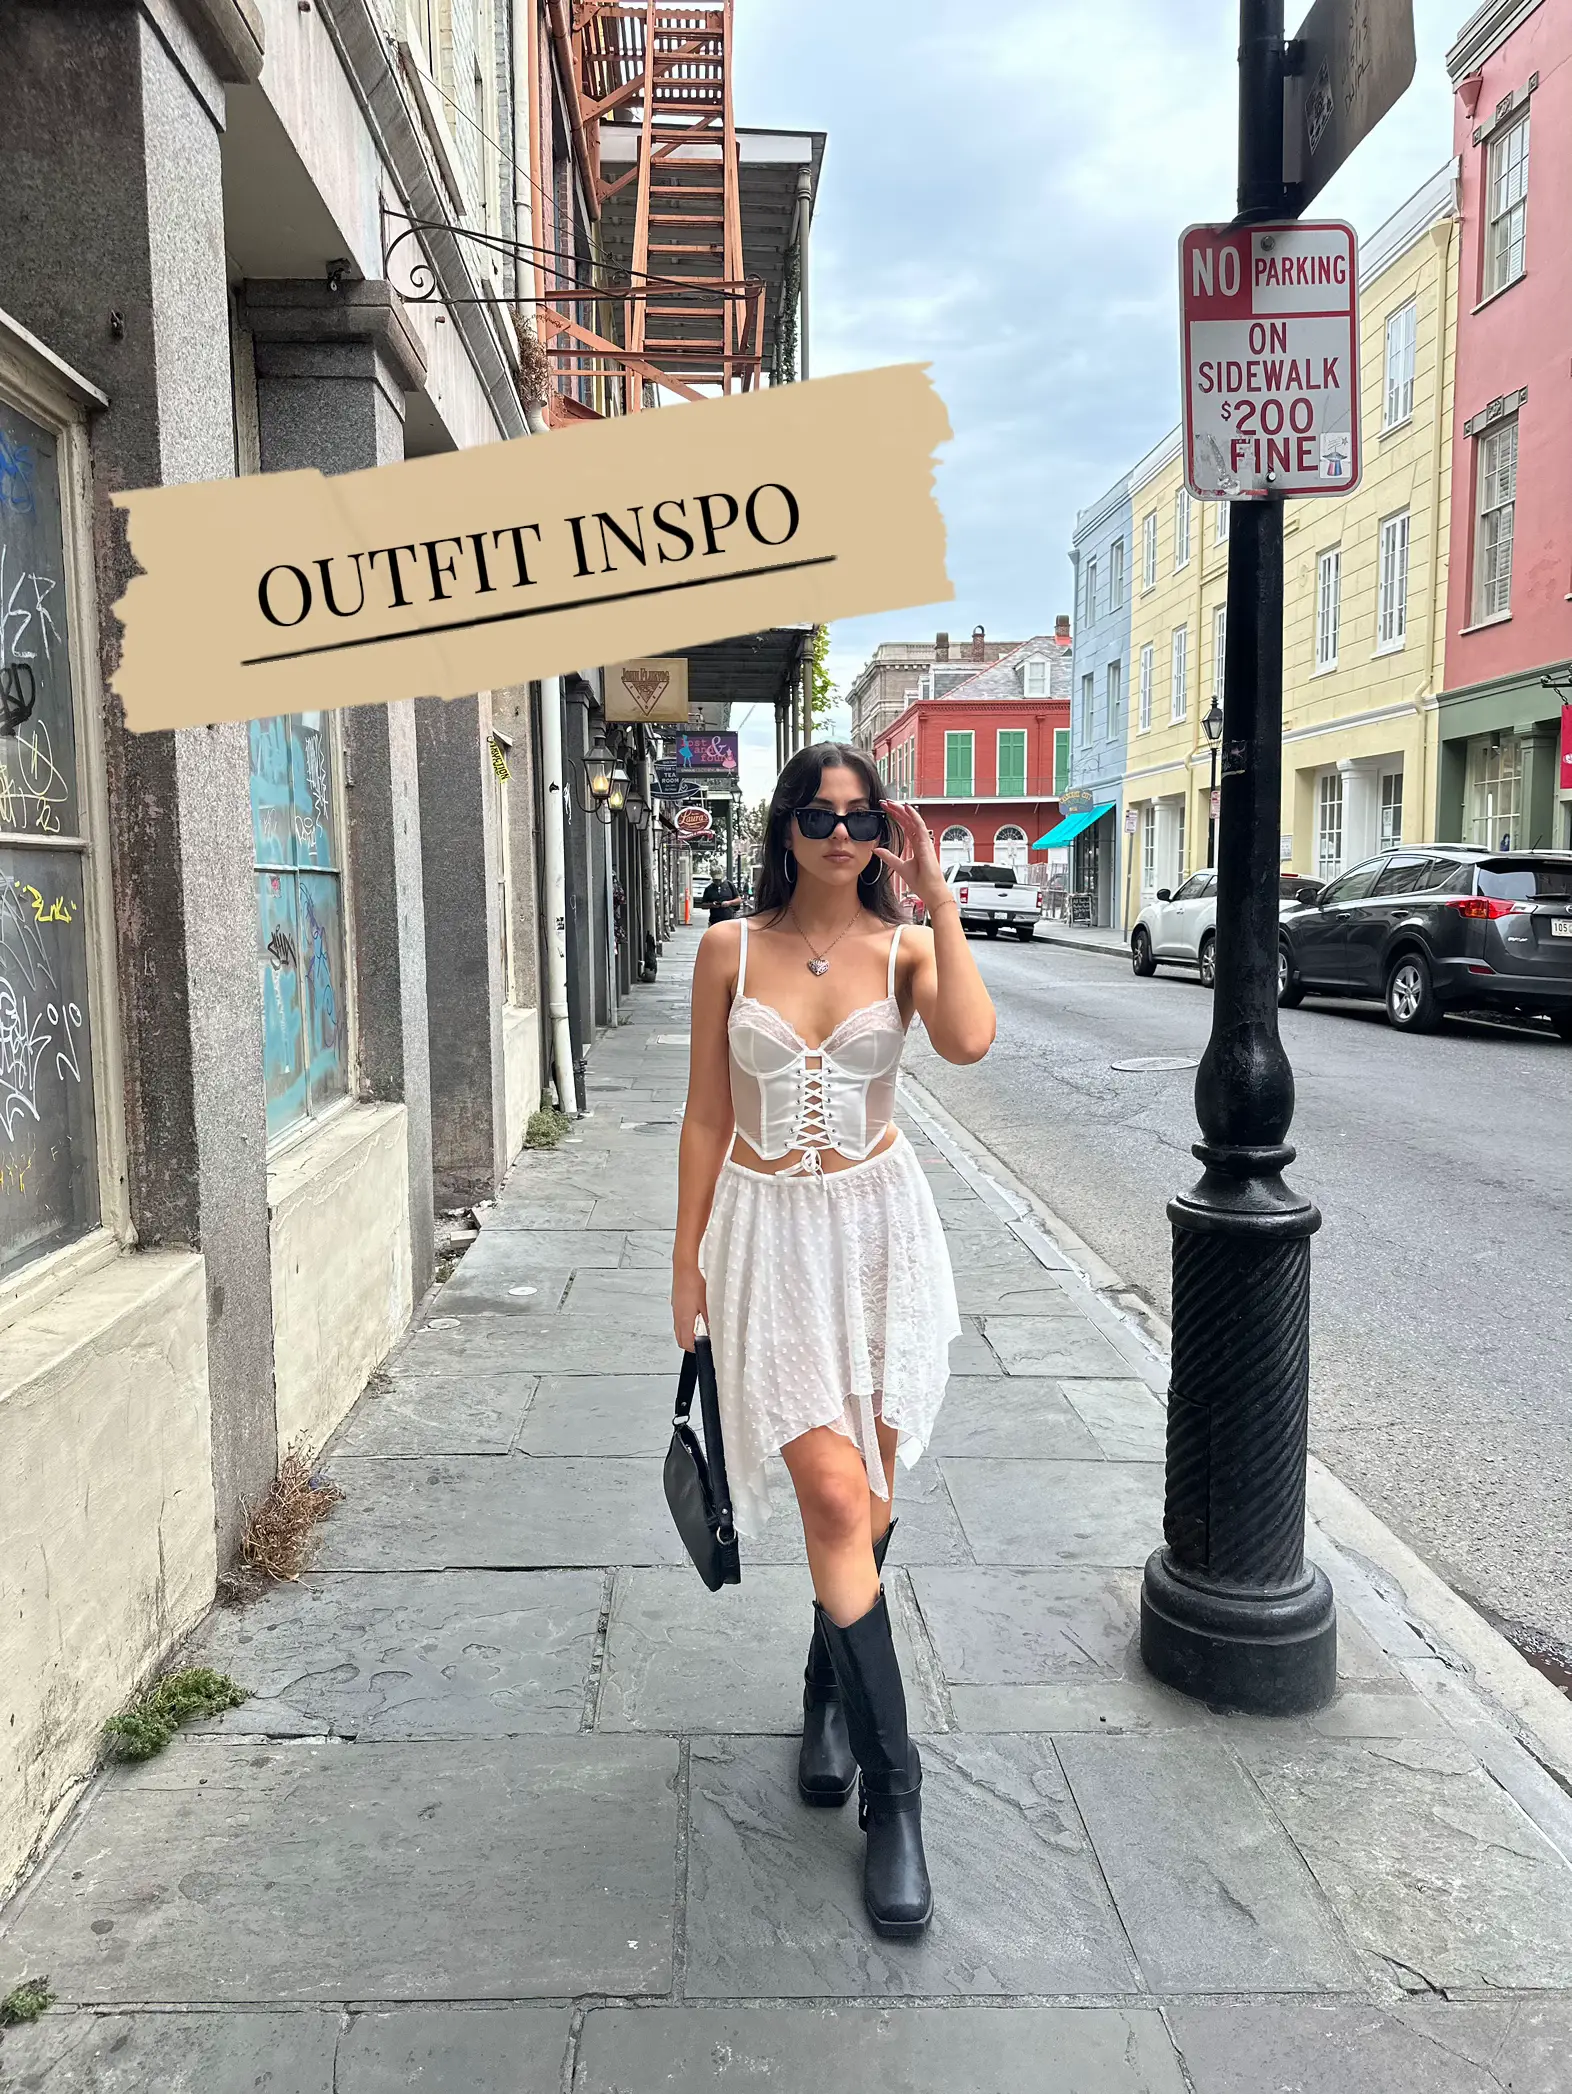 White Lace Bustier Top Outfits (4 ideas & outfits)